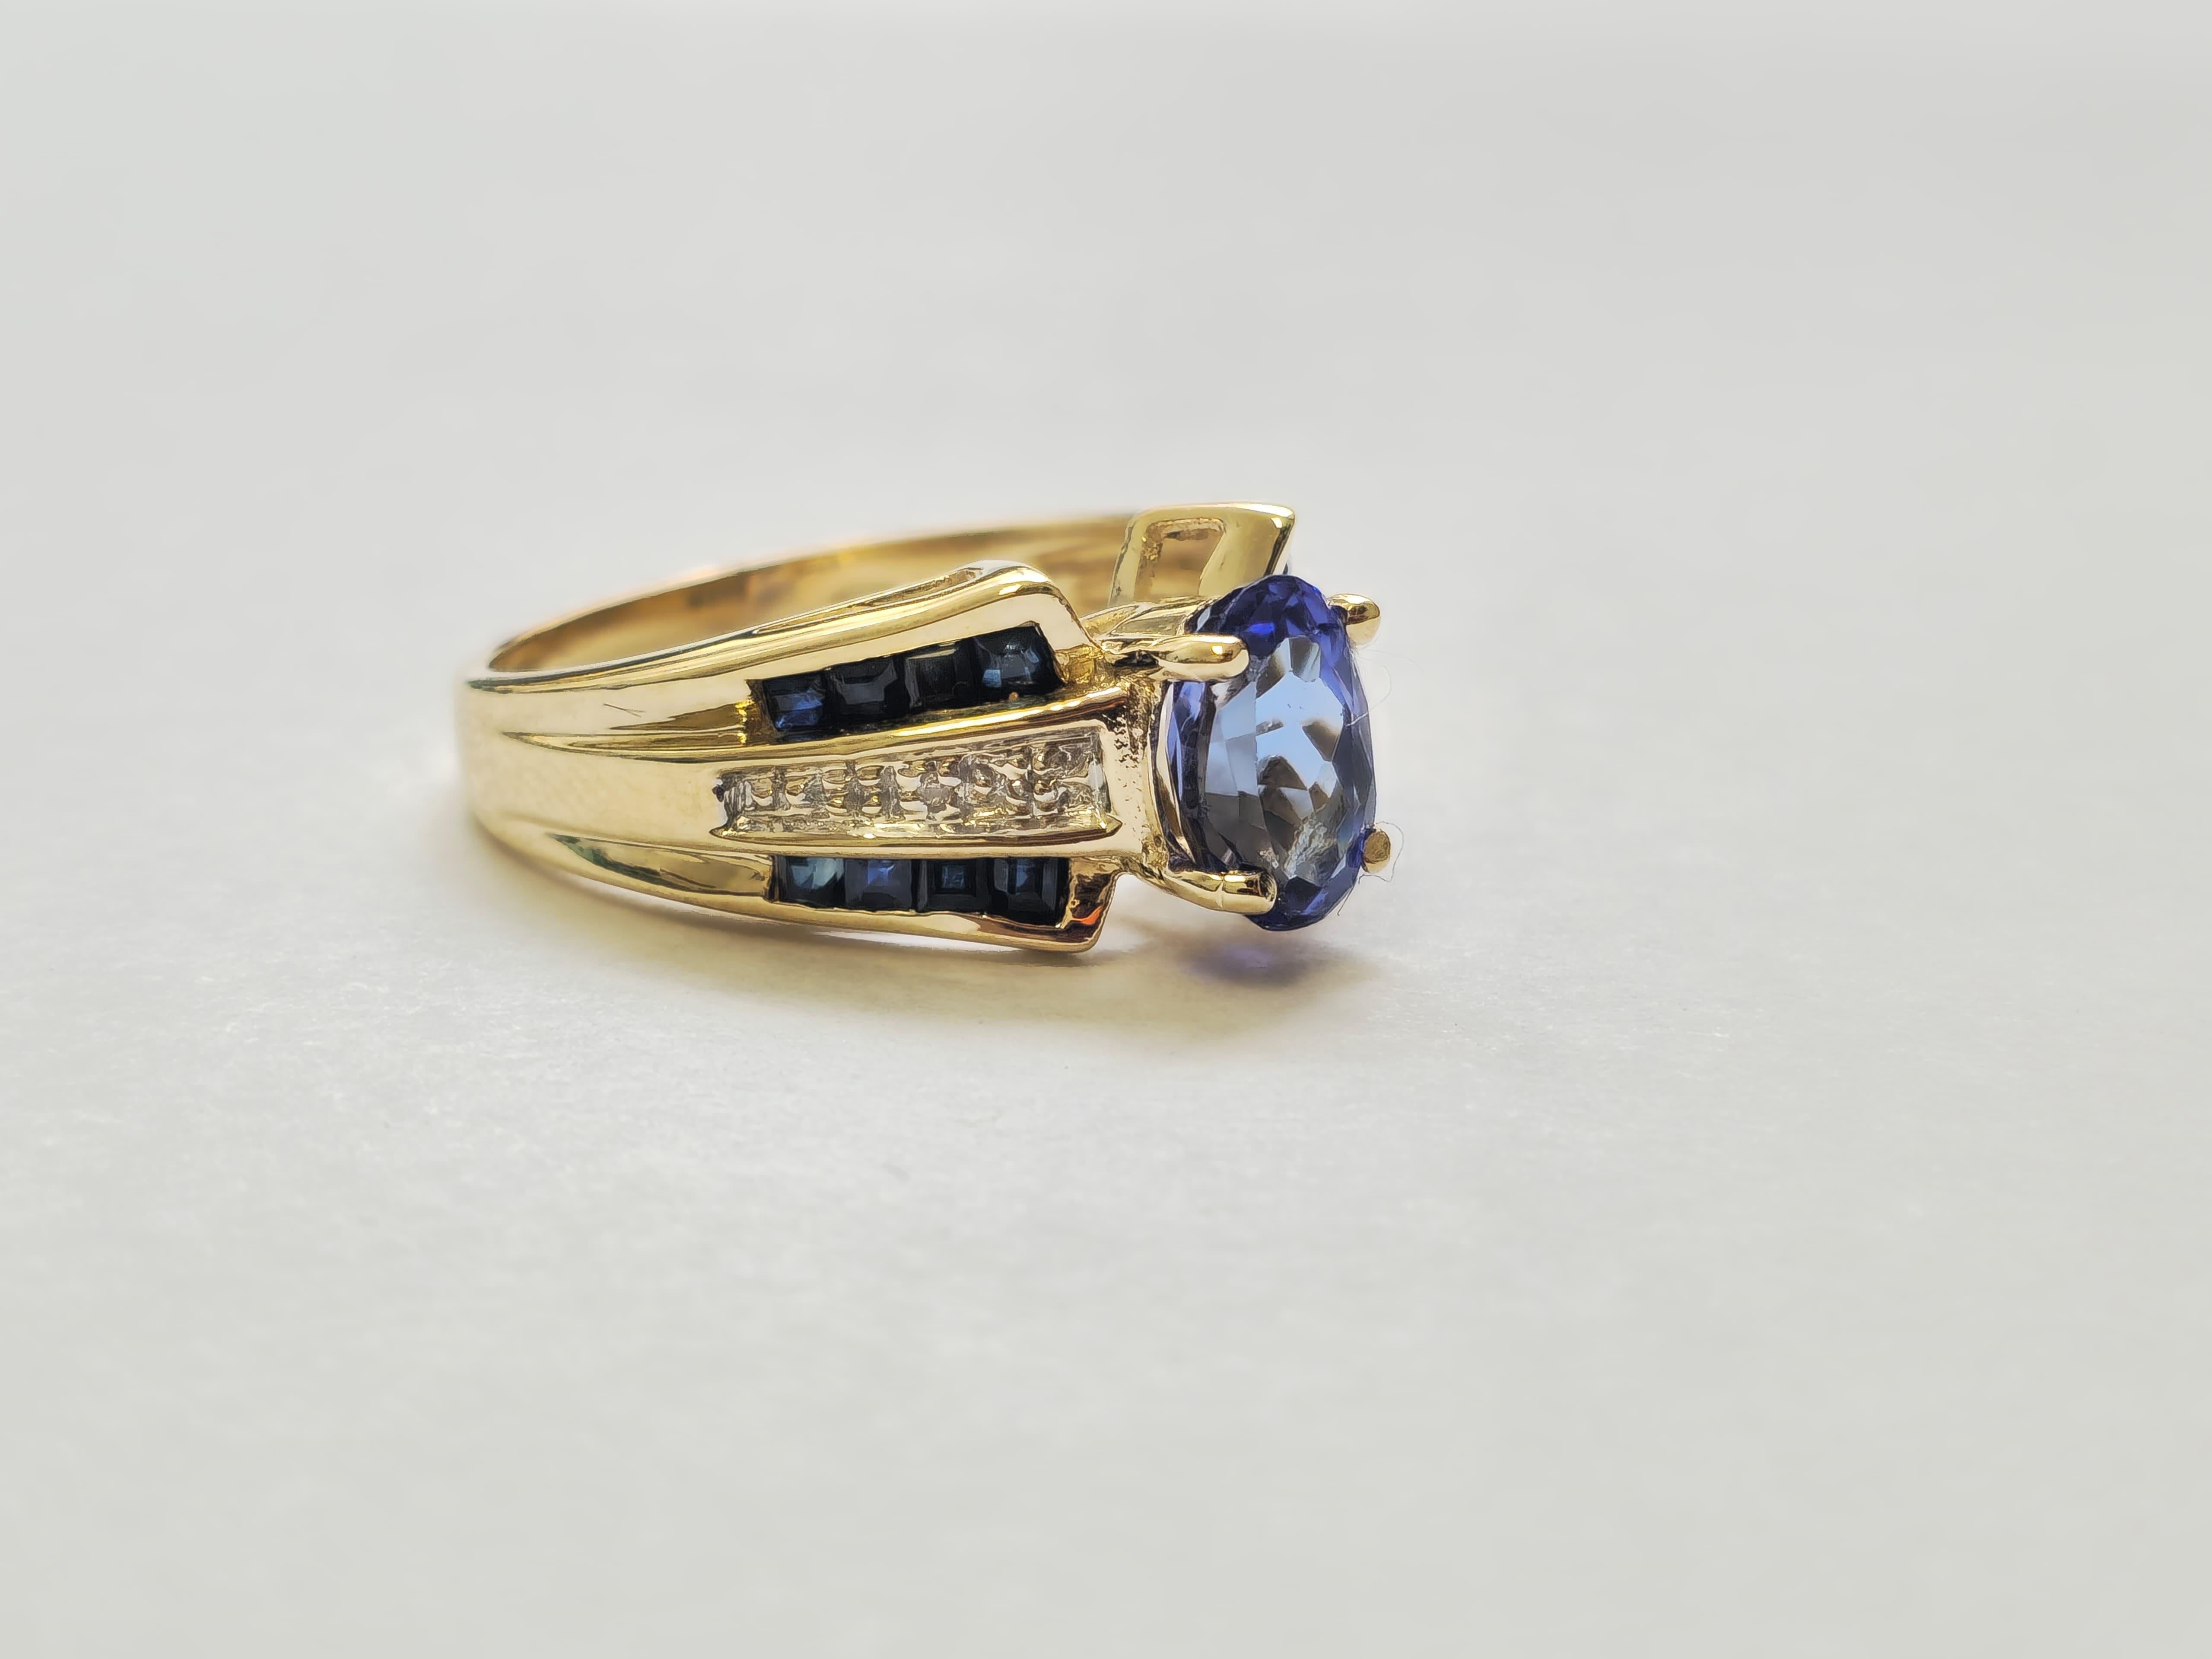 Weighing 5 grams and crafted from 14k gold, this ring features a stunning 1.5-carat tanzanite center stone complemented by 0.20 carats of blue sapphire and diamond side stones, all with SI2 clarity and G color. The ring is sized for US 6.75 and